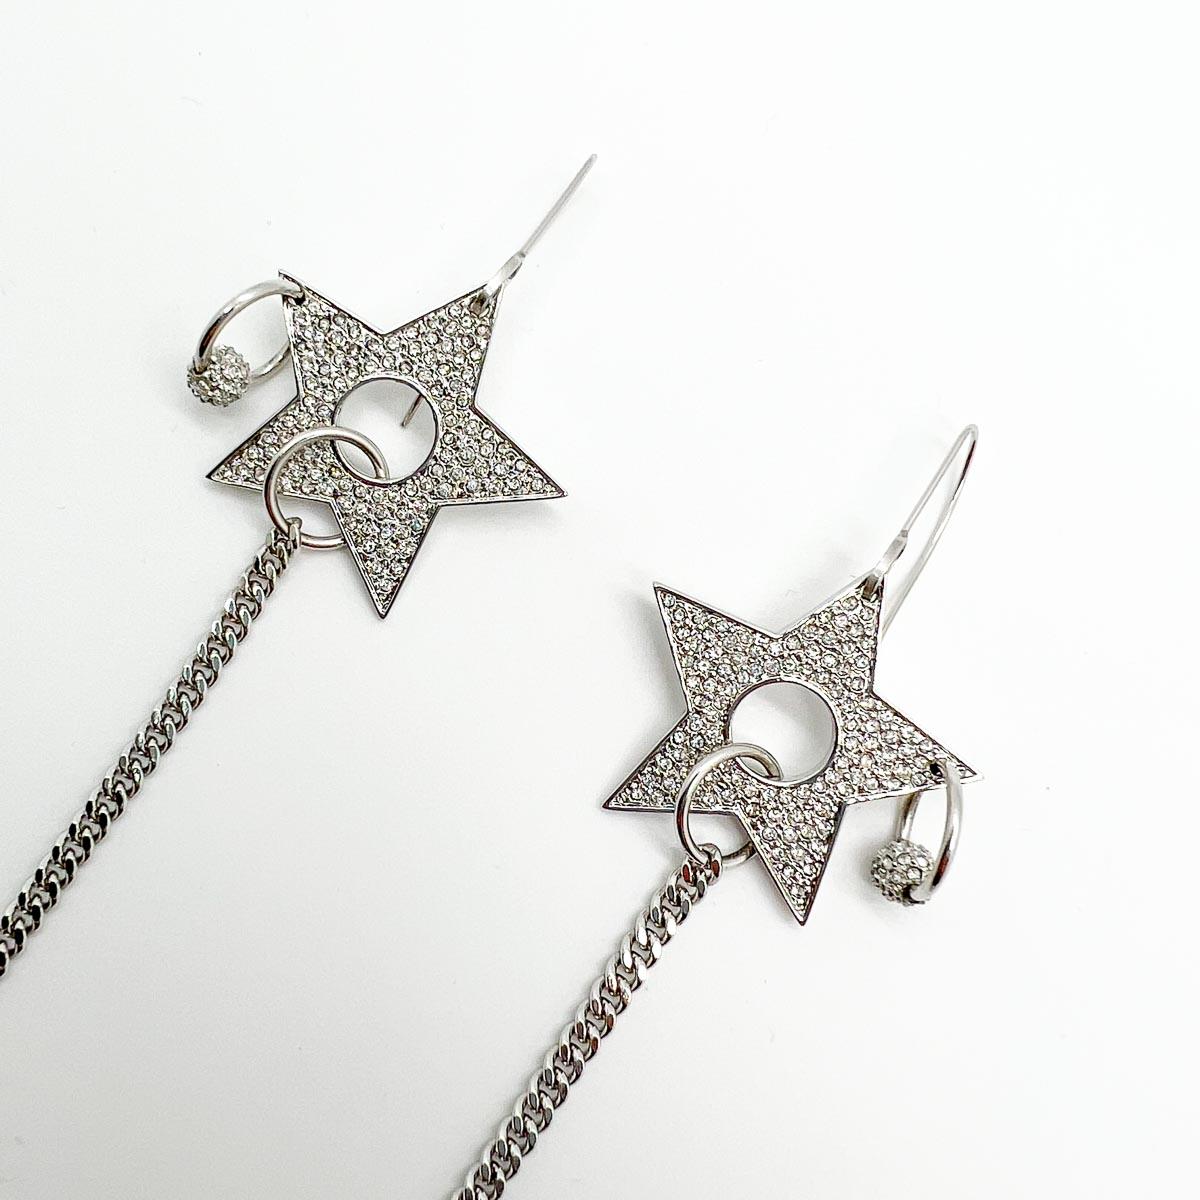 Vintage Dior Star Earrings originating from the Galliano era and the pierced collection. A wonderful combination of the star, Christian Dior's lucky talisman, and Galliano's pierced design, encapsulates the timeline of the House to perfection. A